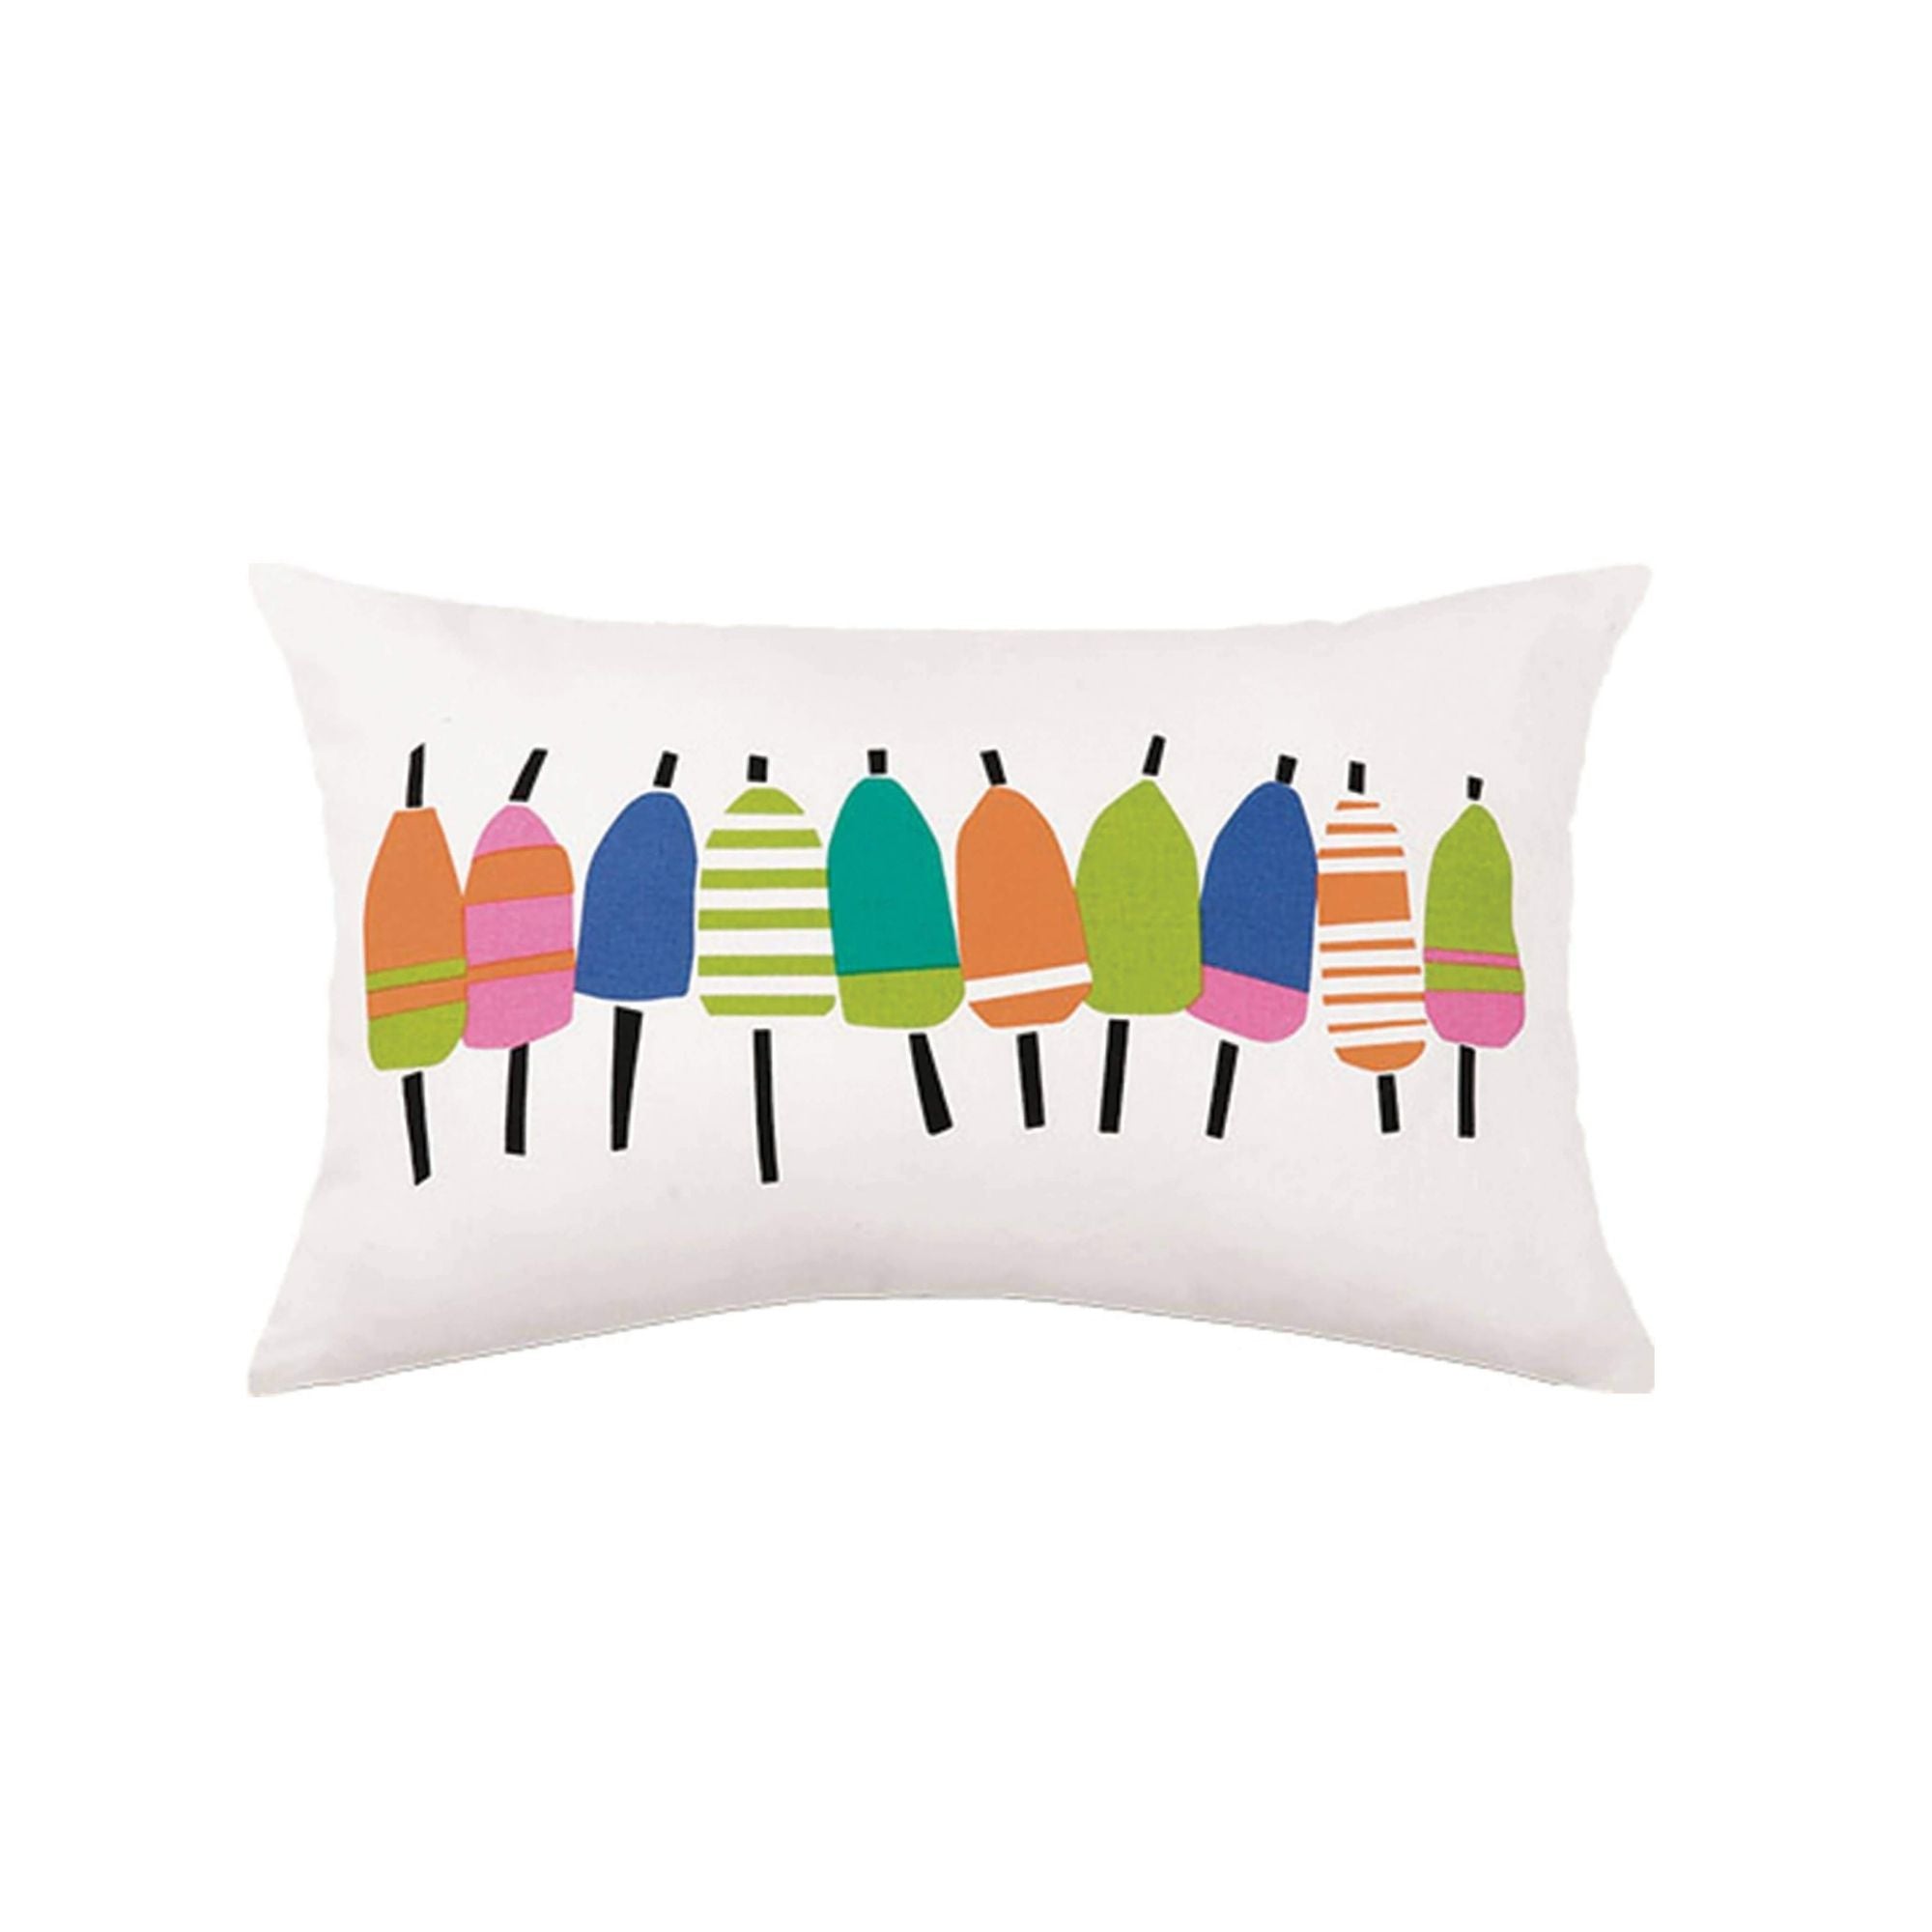 Buoy Canvas Pillow - Utilities Home